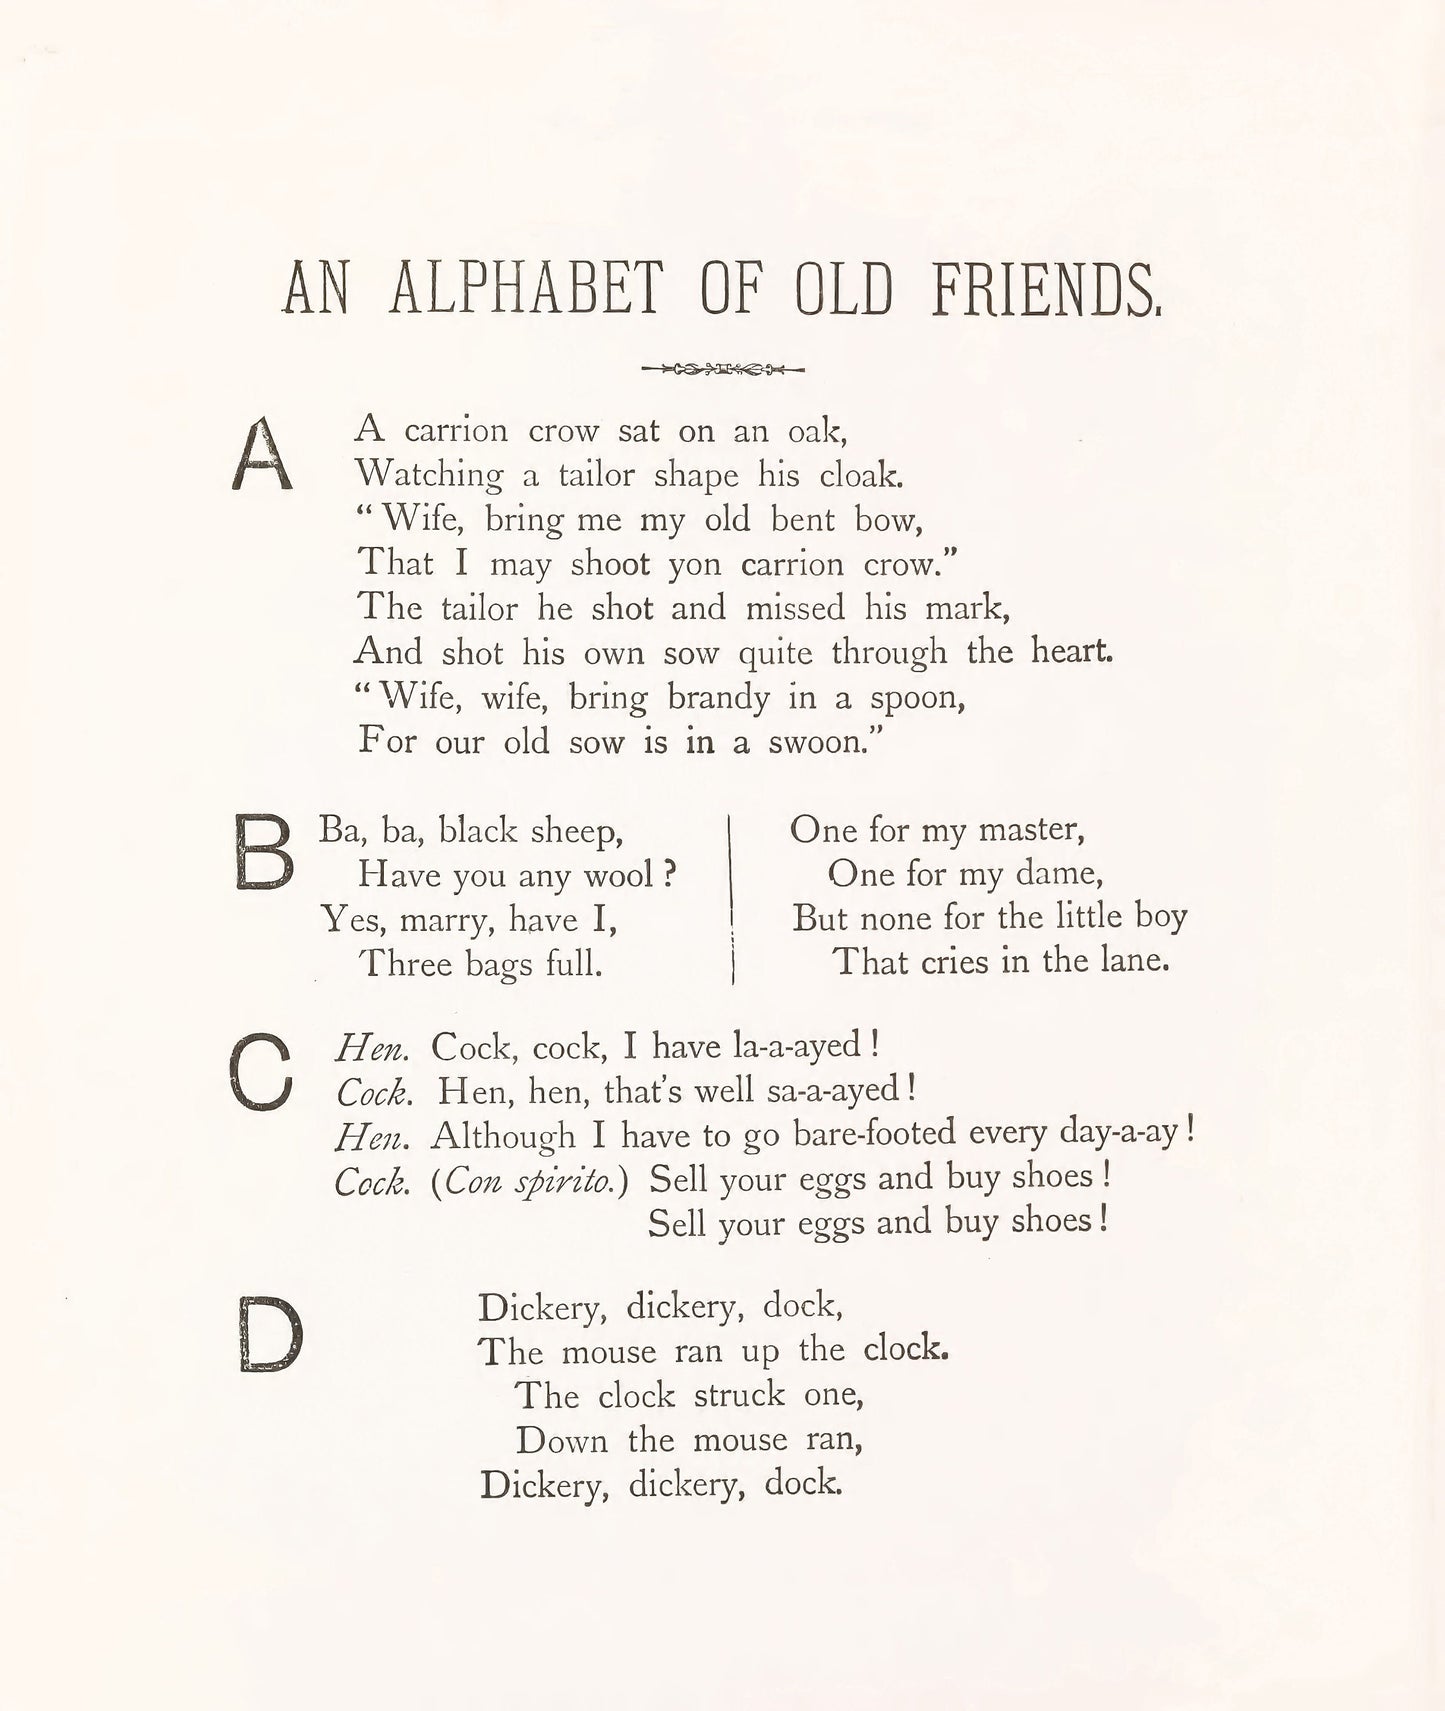 The Alphabet of Old Friends [7 Images]